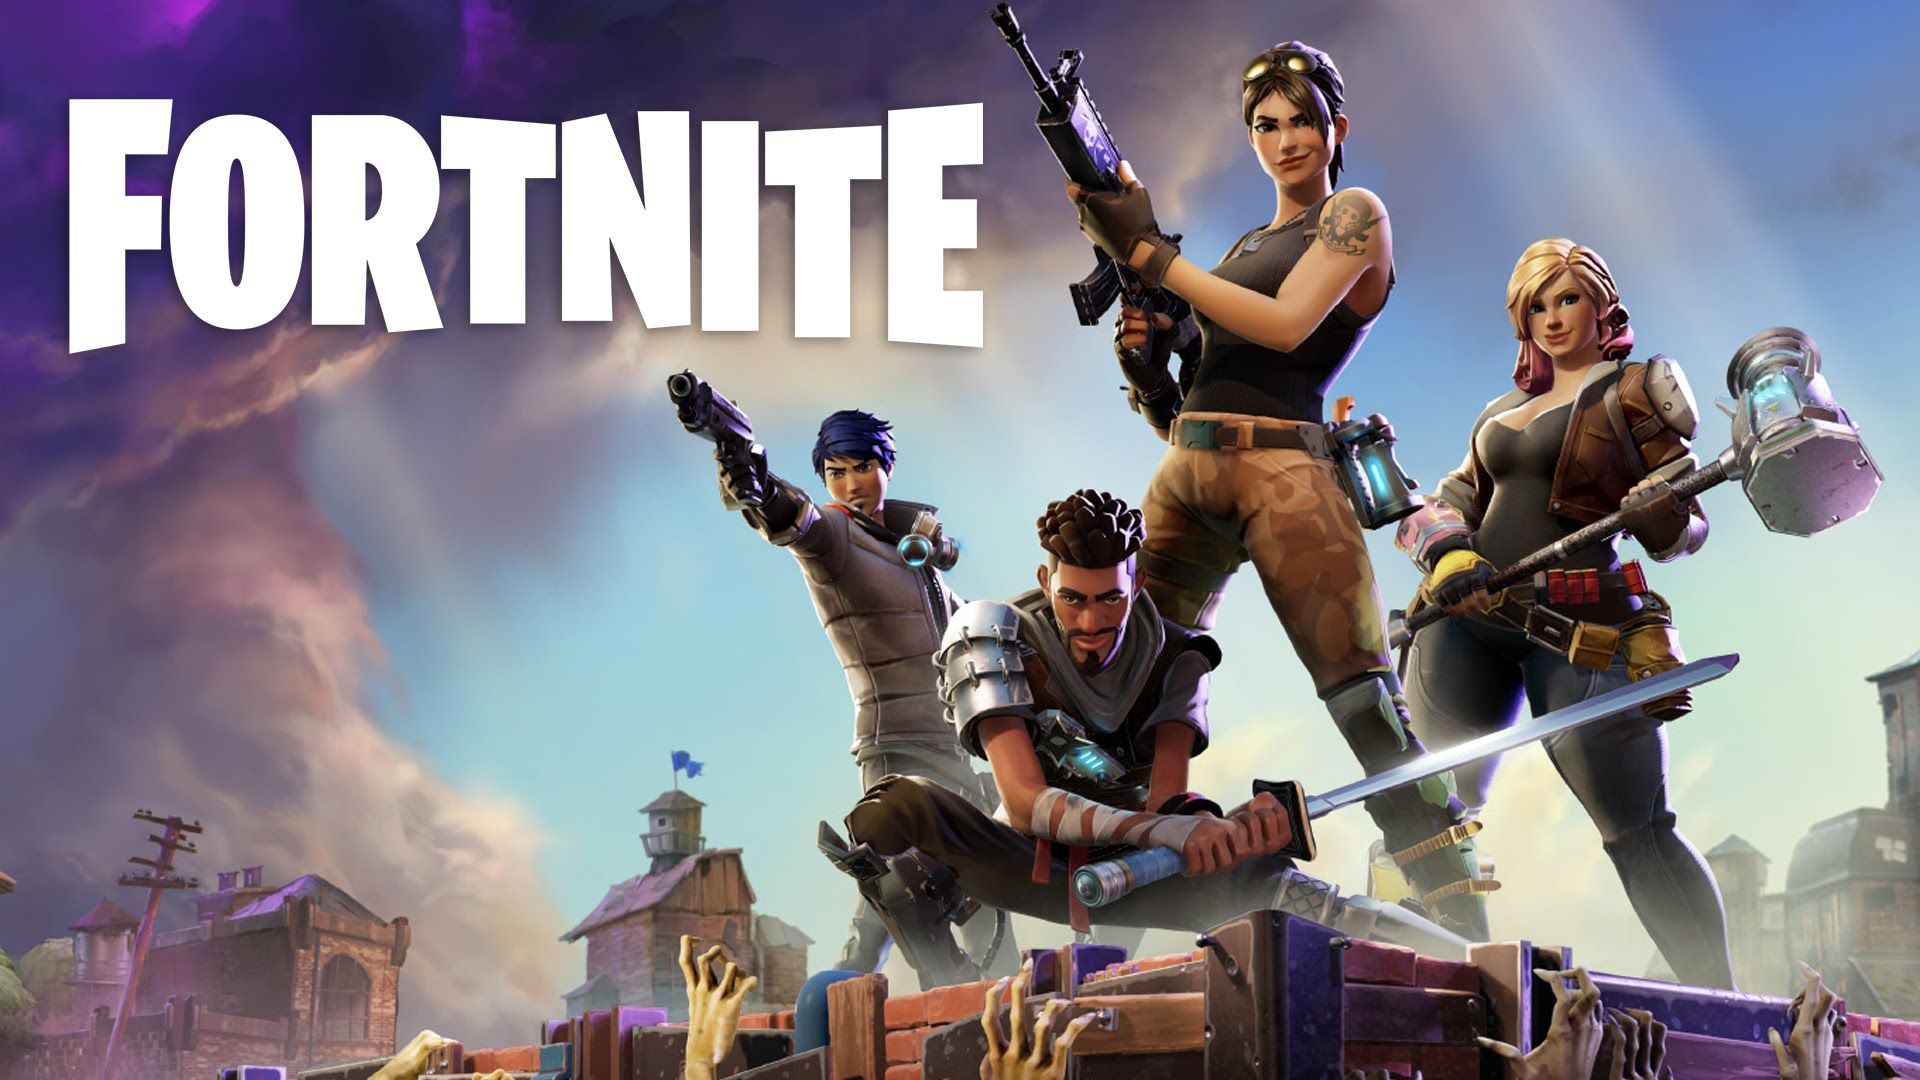 Is Fortnite Coming to Nintendo Switch?